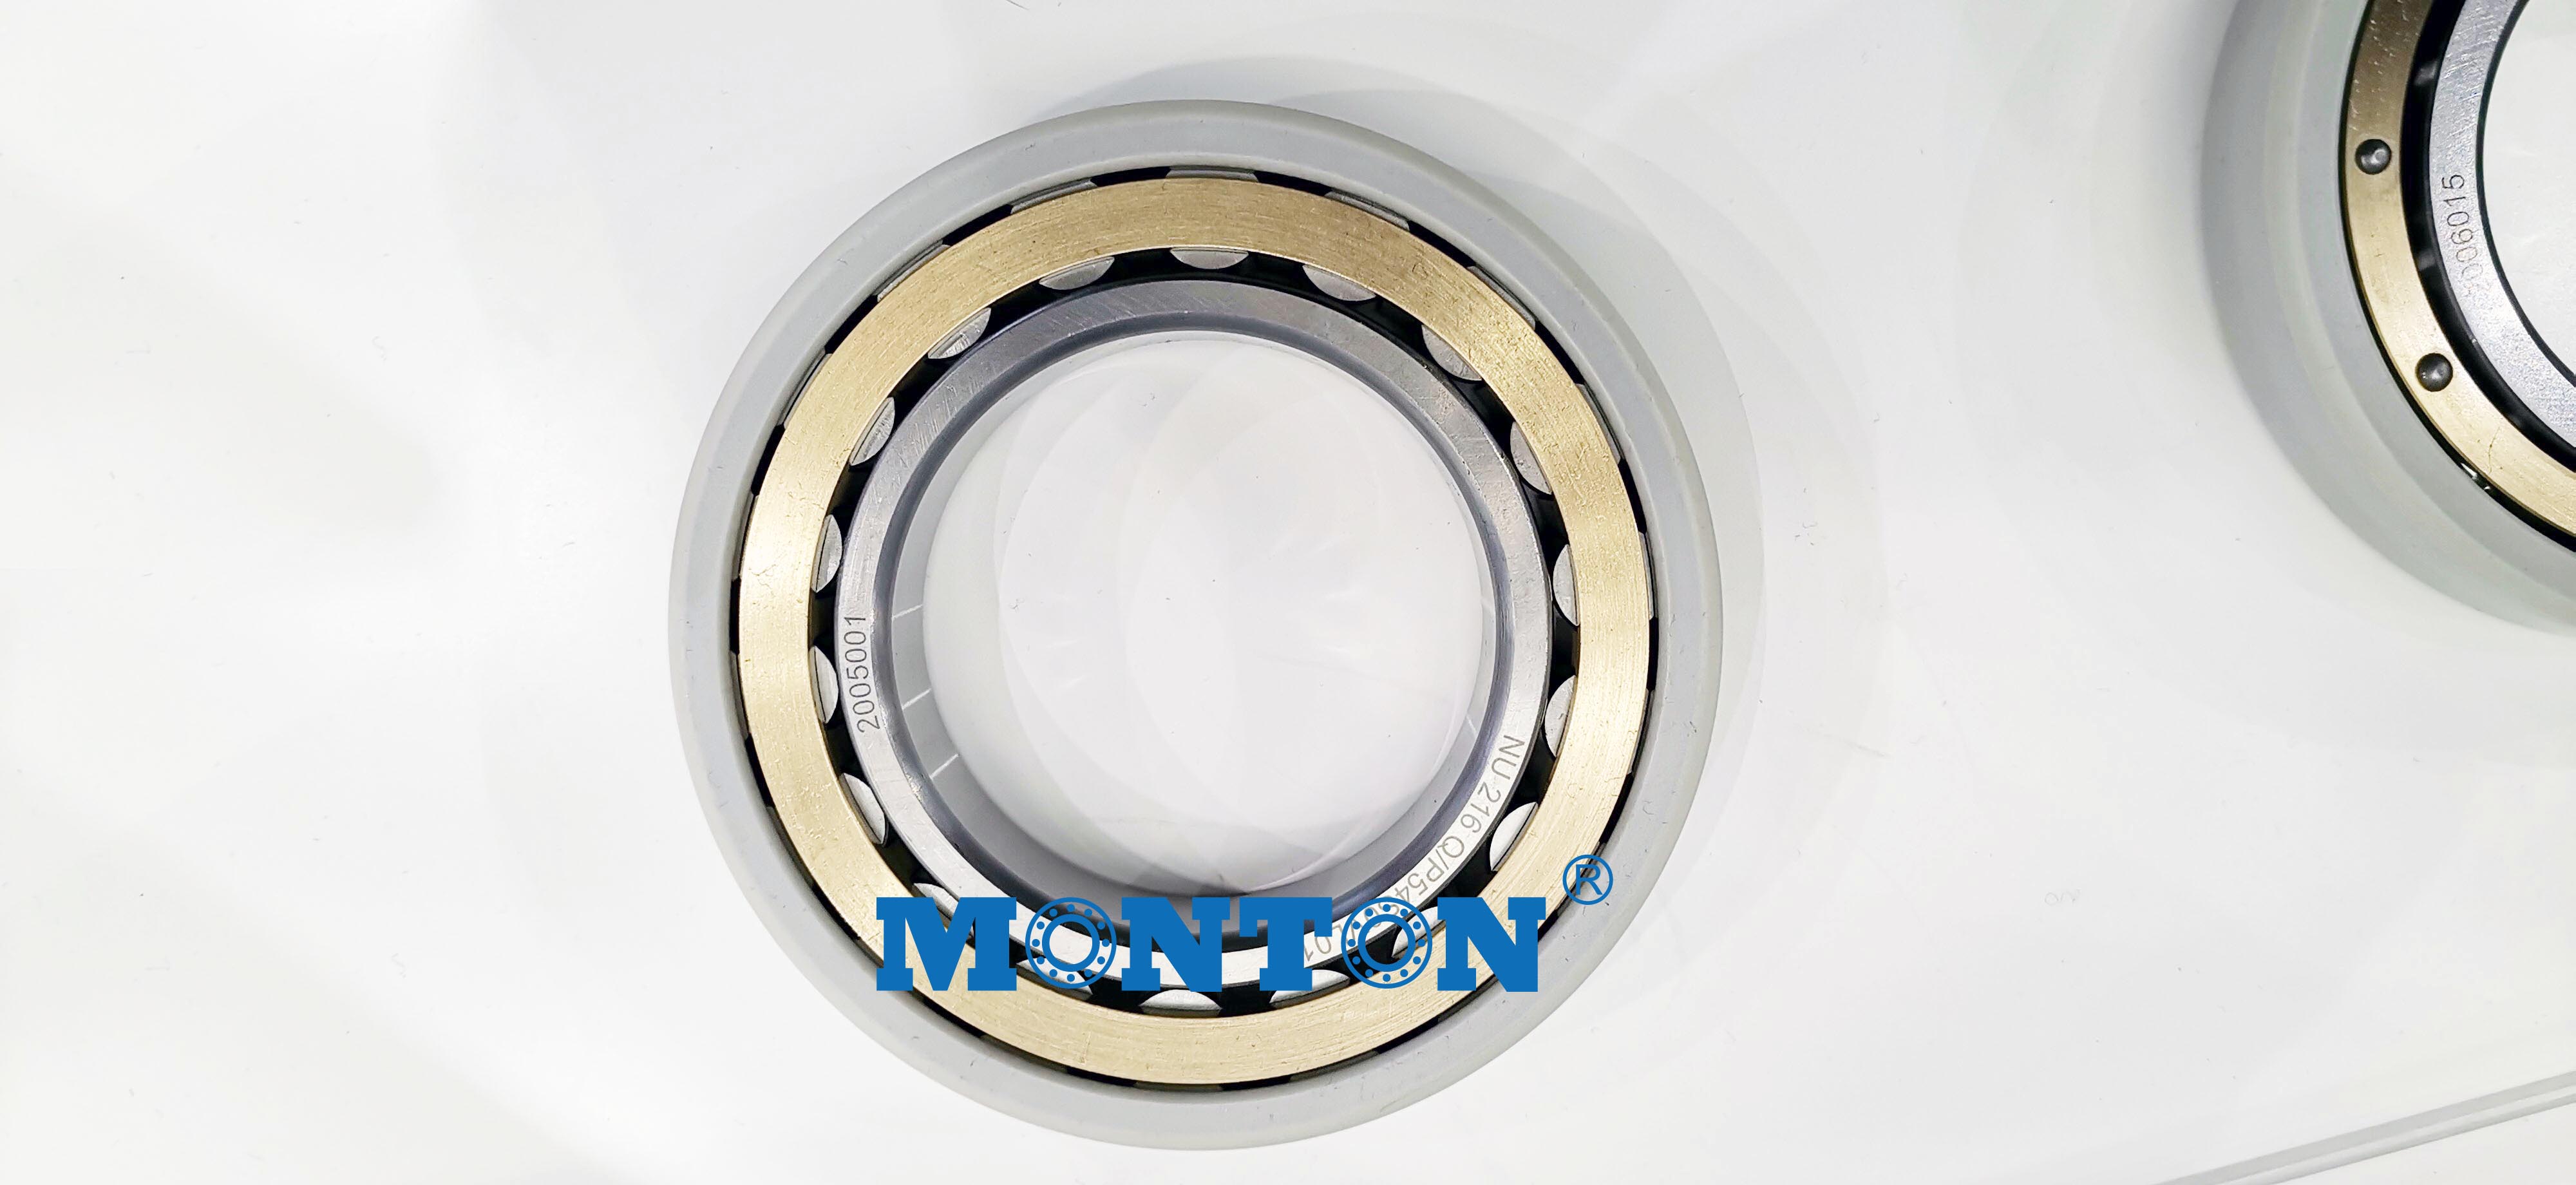 Insulated Insocoat bearings